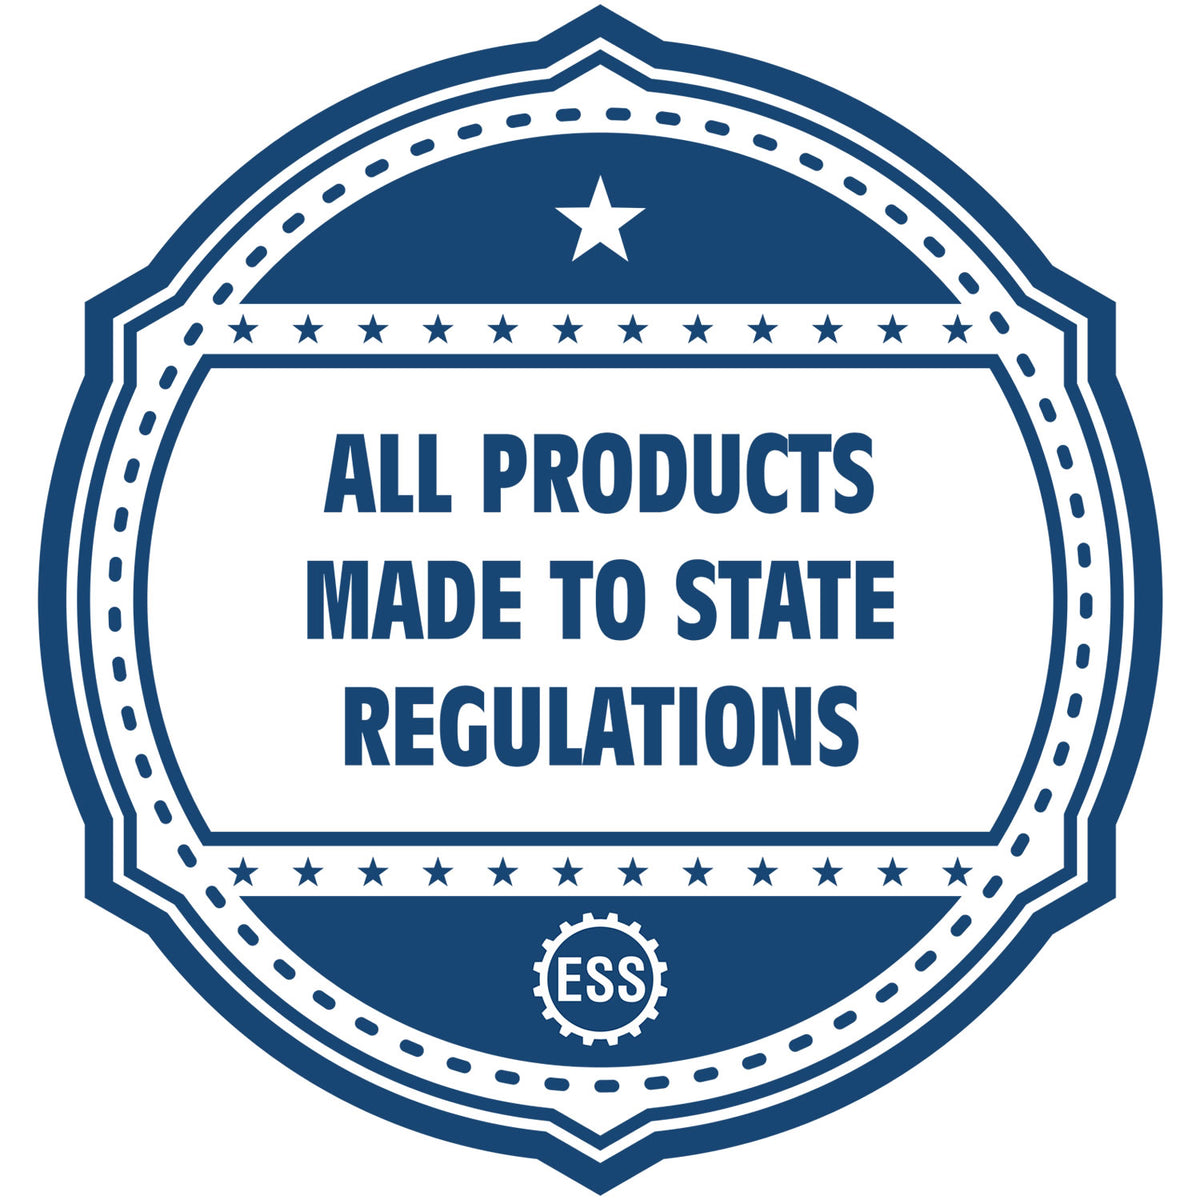 An icon or badge element for the Self-Inking State Seal New Mexico Notary Stamp showing that this product is made in compliance with state regulations.